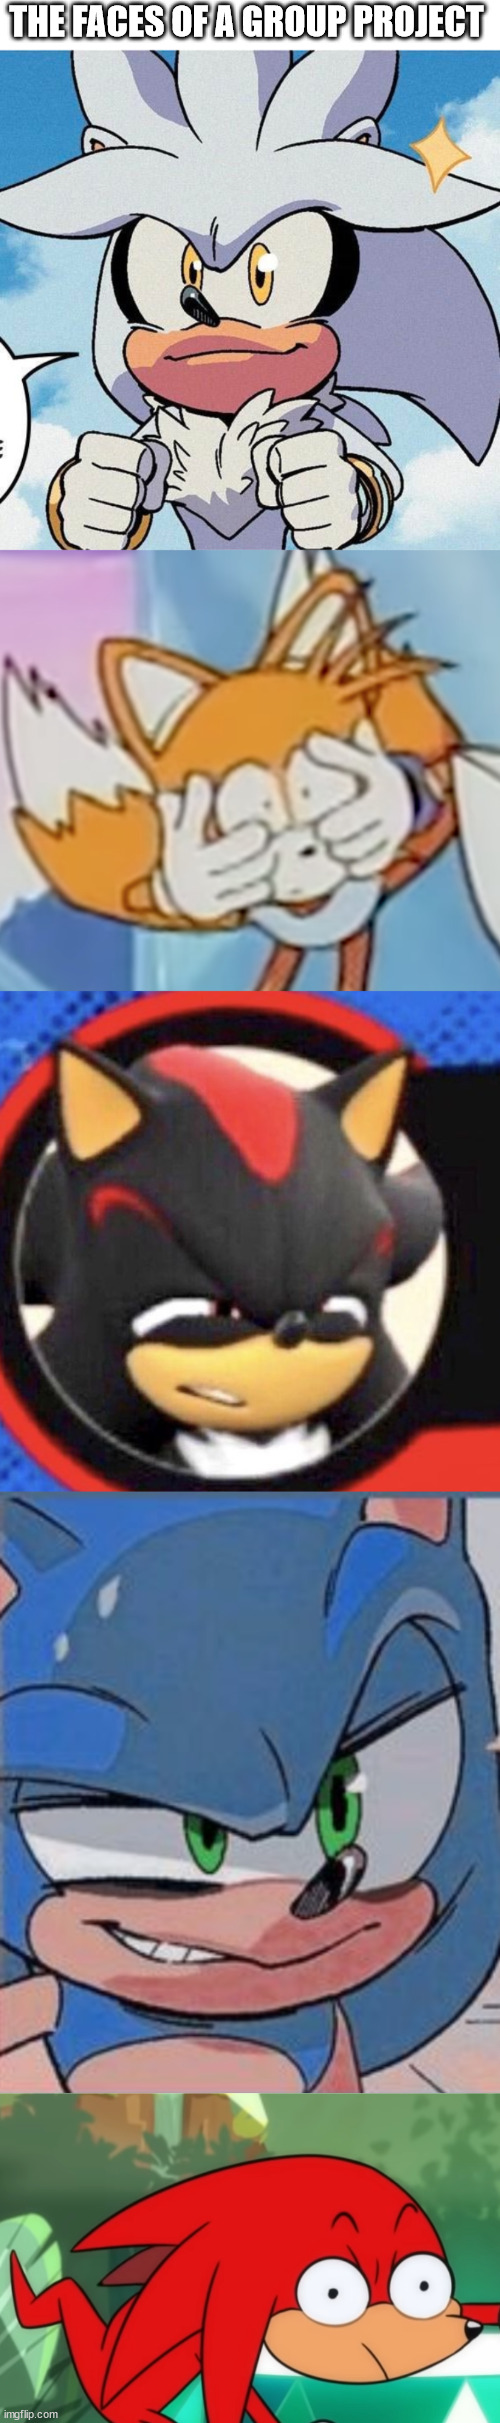 group projects made you or broke you | THE FACES OF A GROUP PROJECT | image tagged in sonic the hedgehog | made w/ Imgflip meme maker